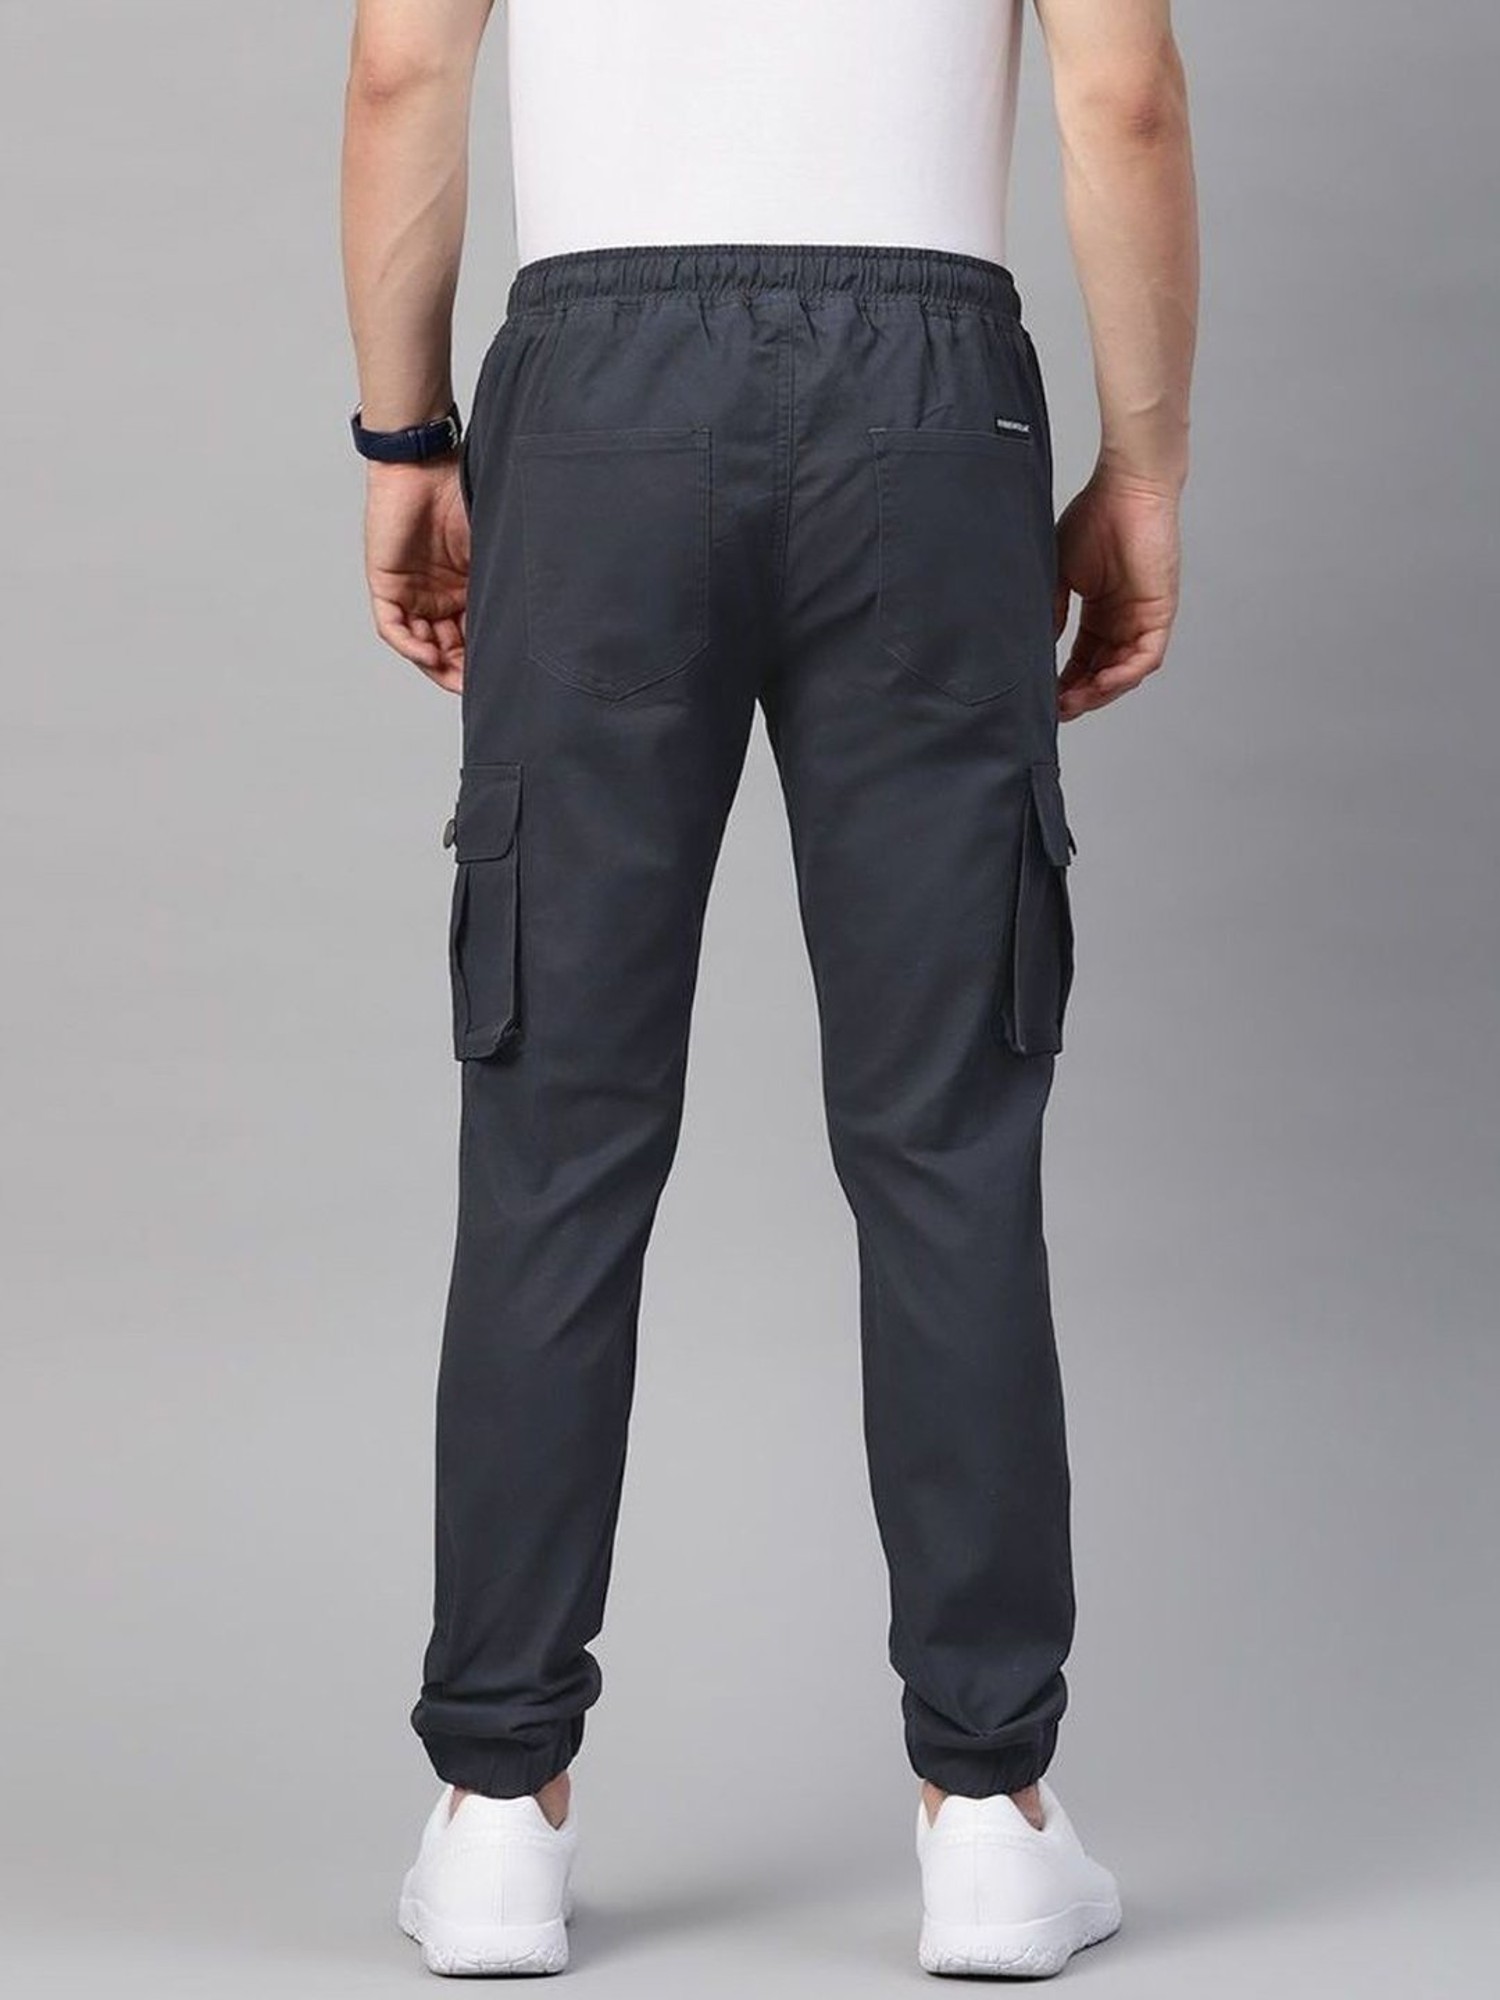 Hubberholme Trousers upto 86% Off starting @344 - THE DEAL APP | Get Best  Deals, Discounts, Offers, Coupons for Shopping in India